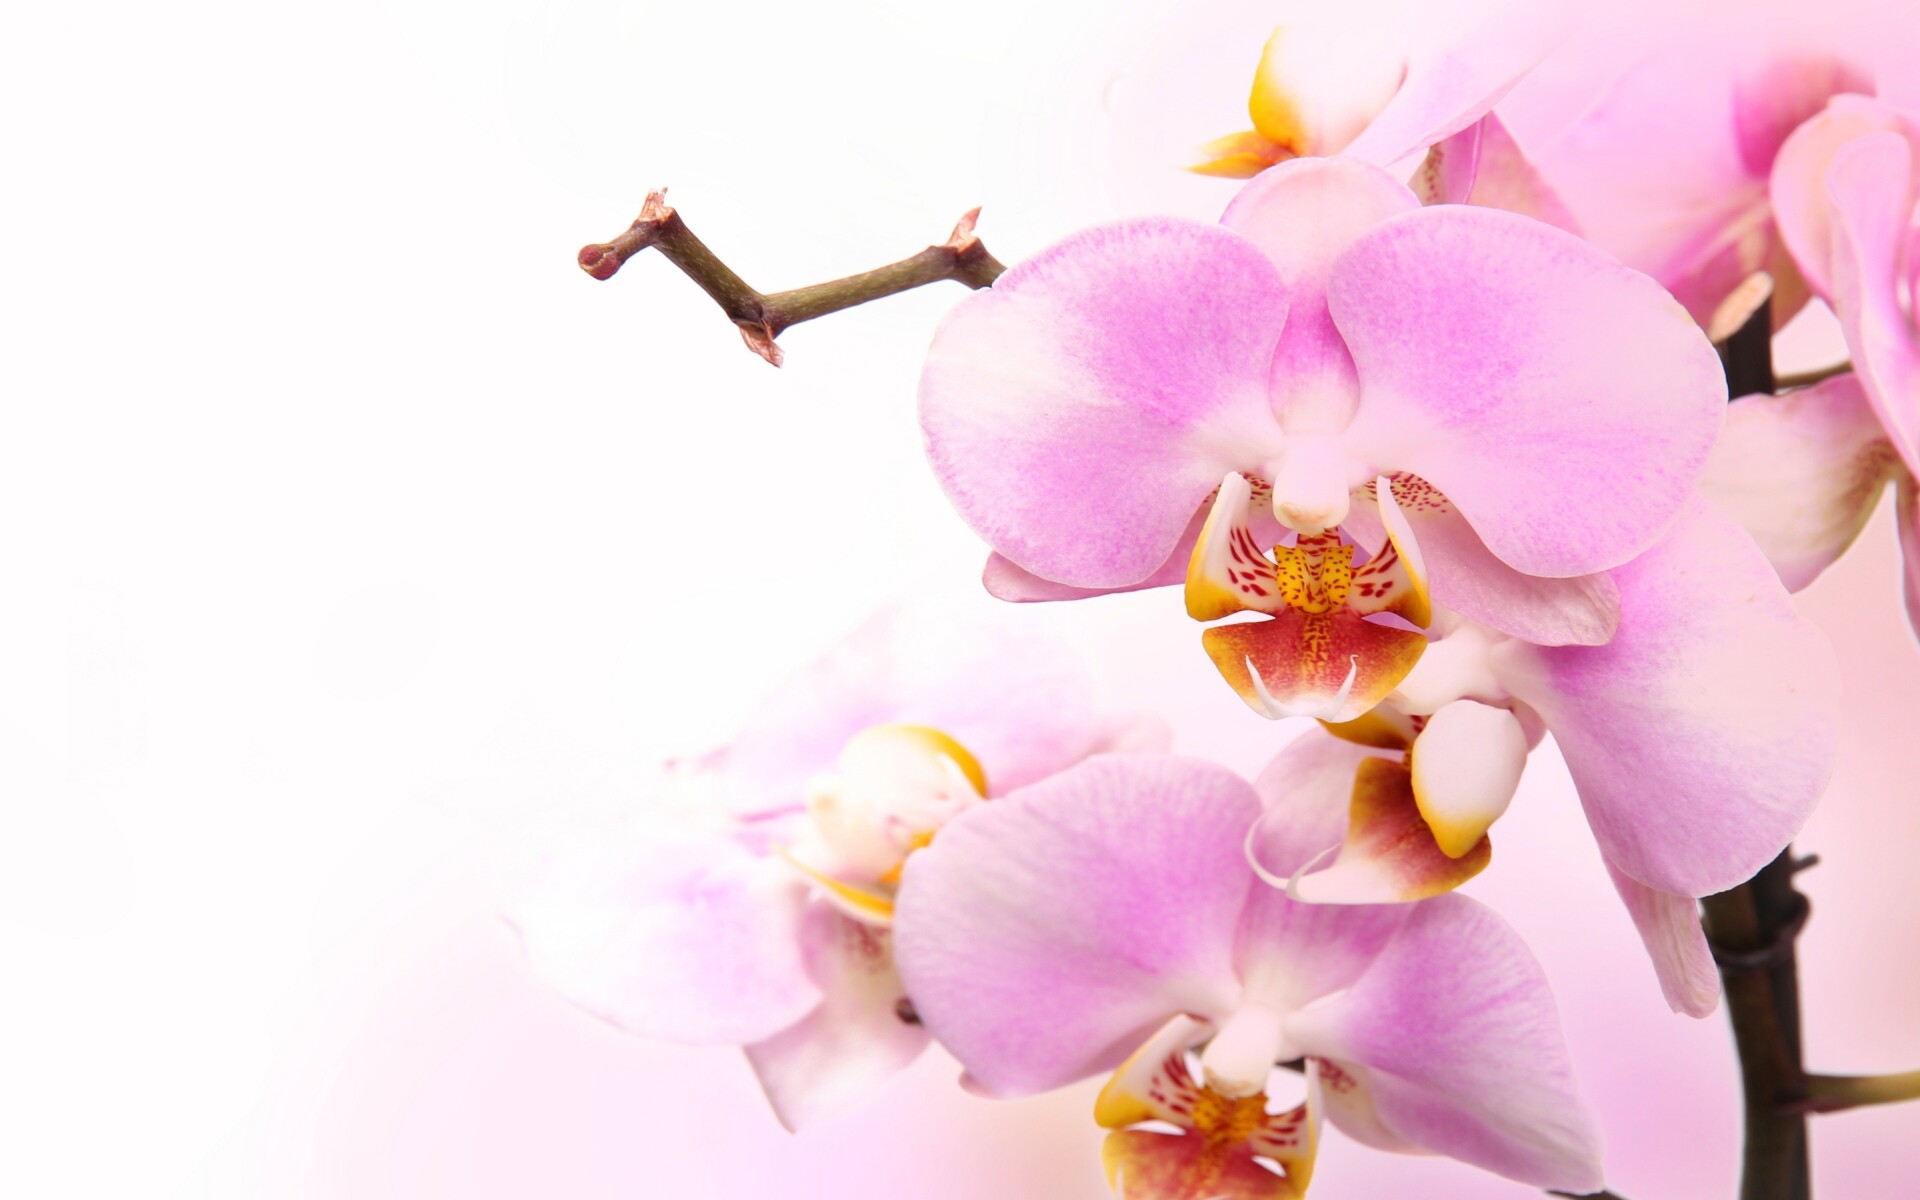 Orchid: It is one of the largest of all plant families, and its members are identified by a characteristic bilateral symmetry of the flowers, with upward-facing petals. 1920x1200 HD Wallpaper.